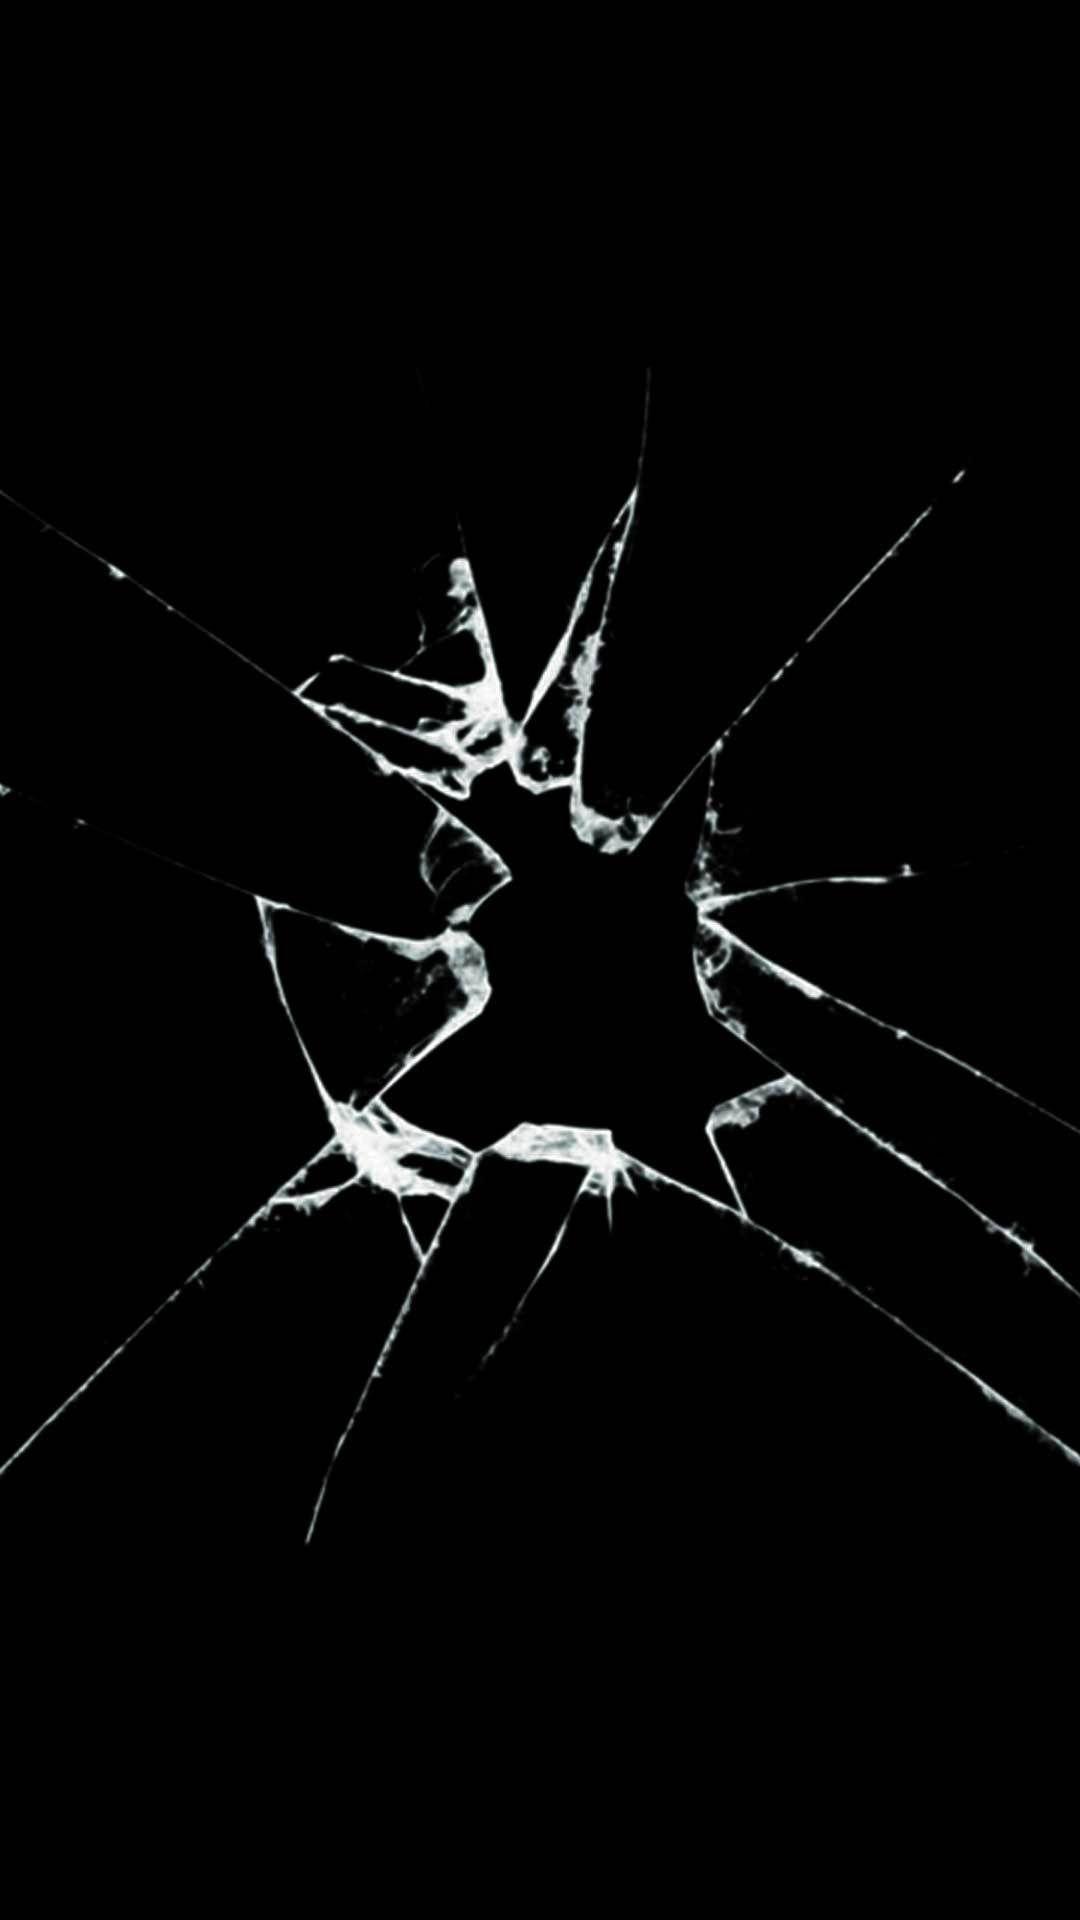 Cracked iPhone Screen Wallpapers - Wallpaper Cave